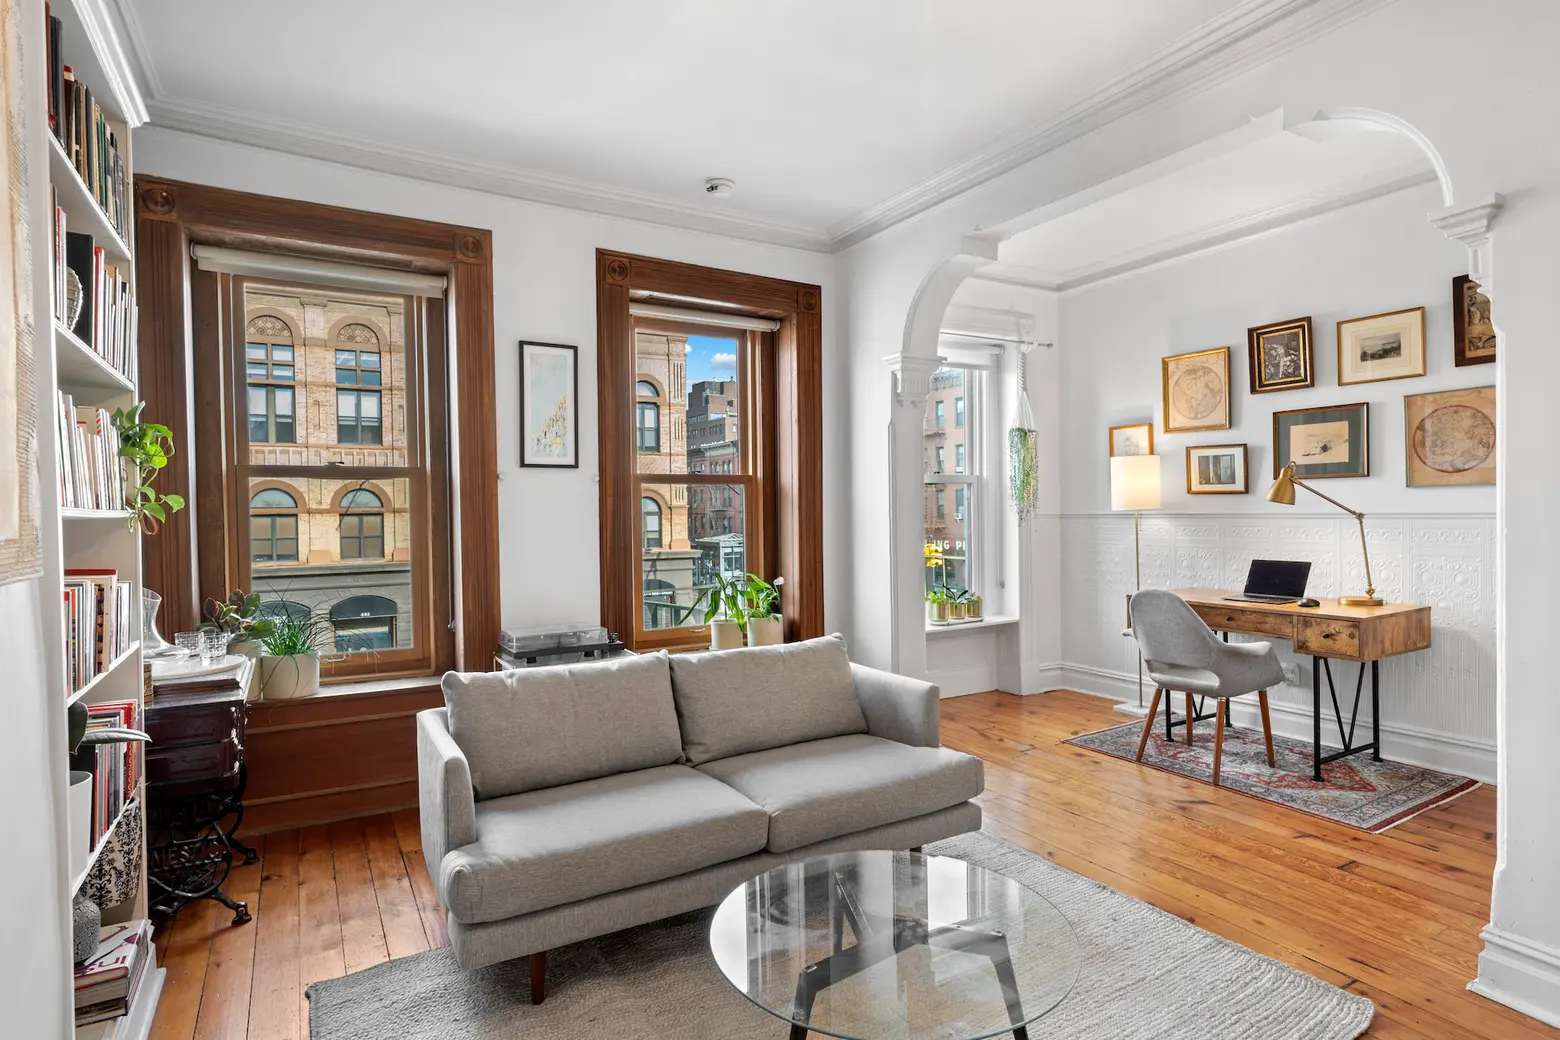 For $750K, this Park Slope co-op has a working fireplace, lots of closets, laundry, and loads of charm